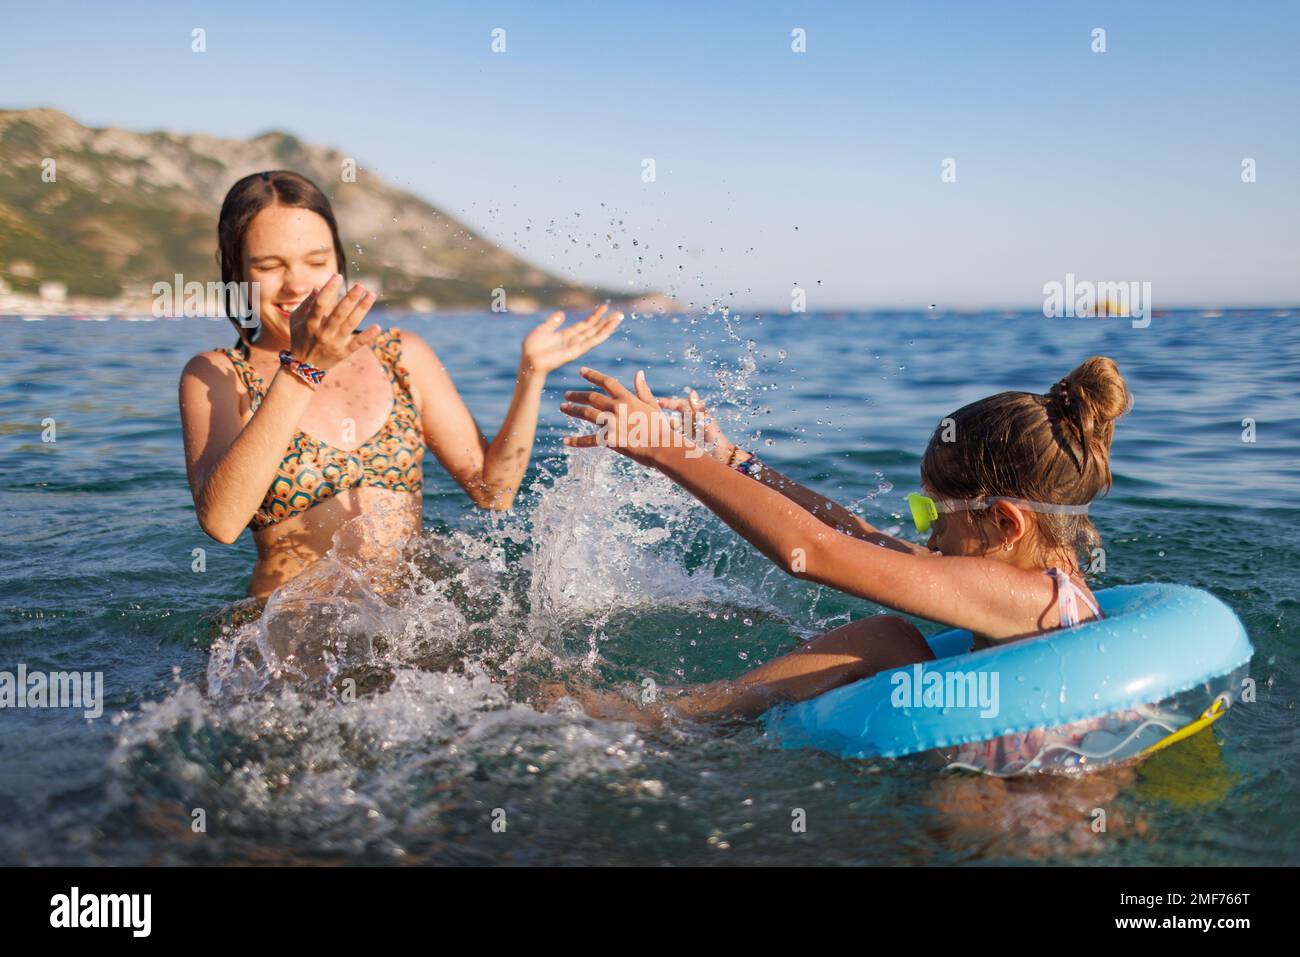 An older sister and her younger sister with blue swimming goggles, who sits in a small bright inflatable circle, splash each other in the warm waters Stock Photo